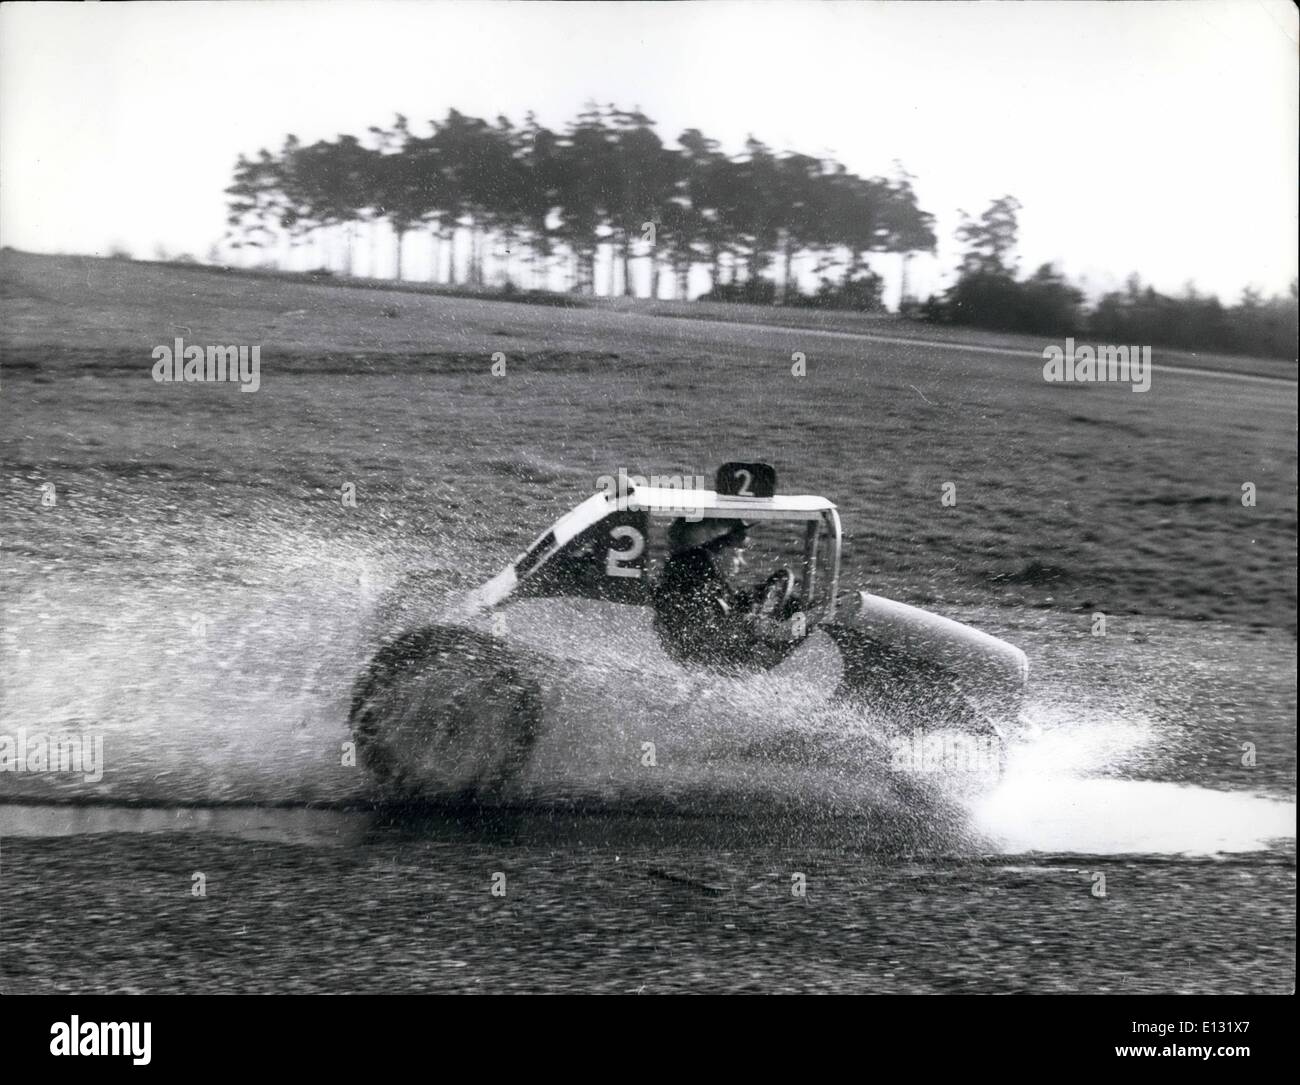 Feb. 26, 2012 - And through the water splash goes the 5-year old stock-car driver who thinks nothing of doing a few fast turns on the Common in his miniature car. Stock Photo